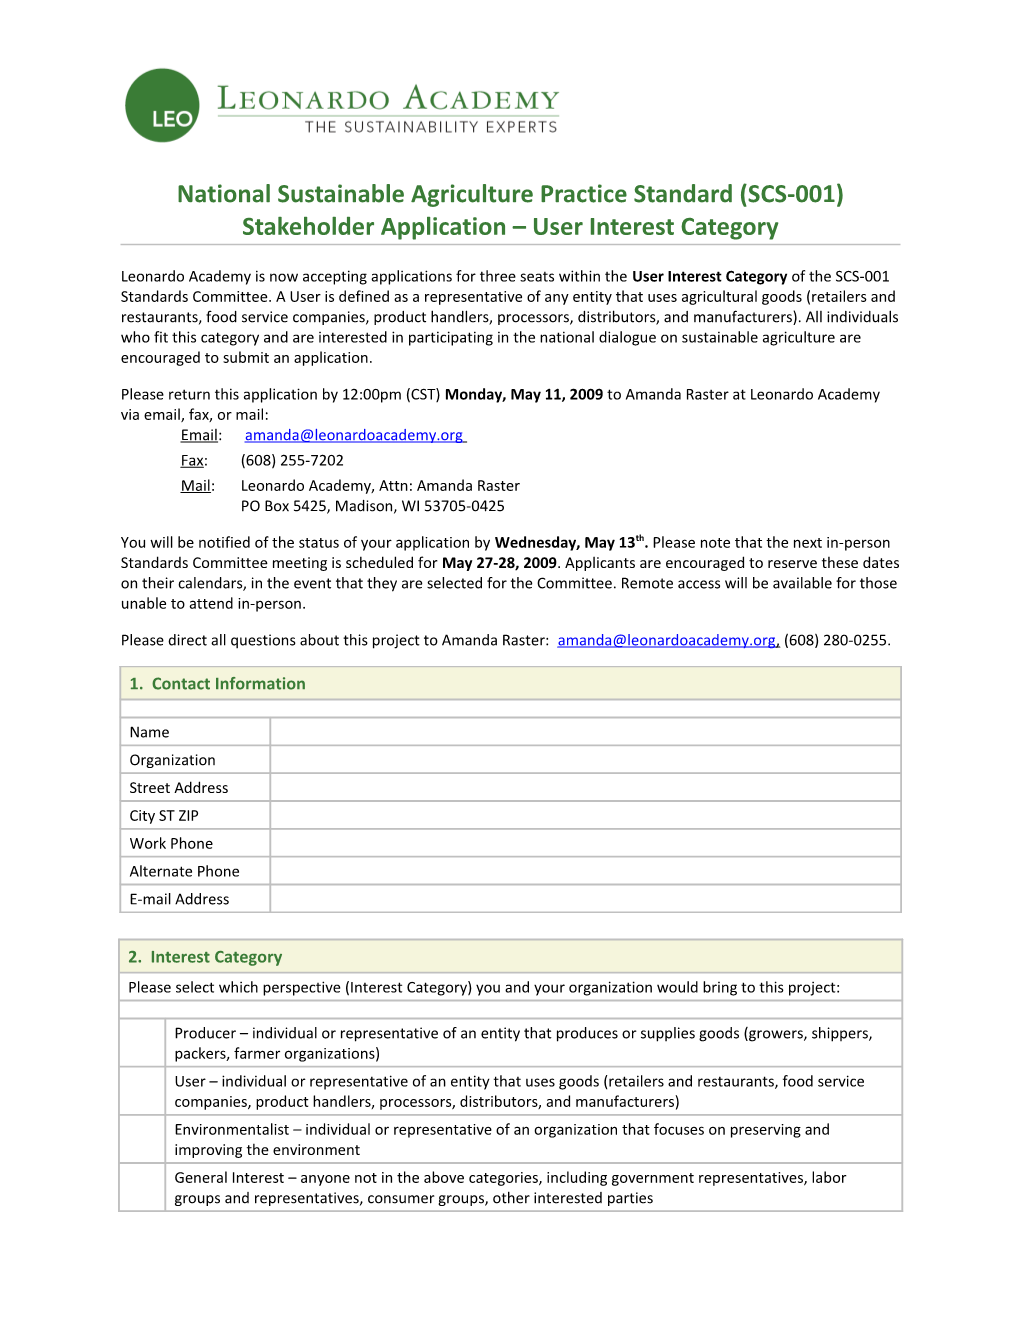 Sustainable Agriculture Standard Stakeholder Application